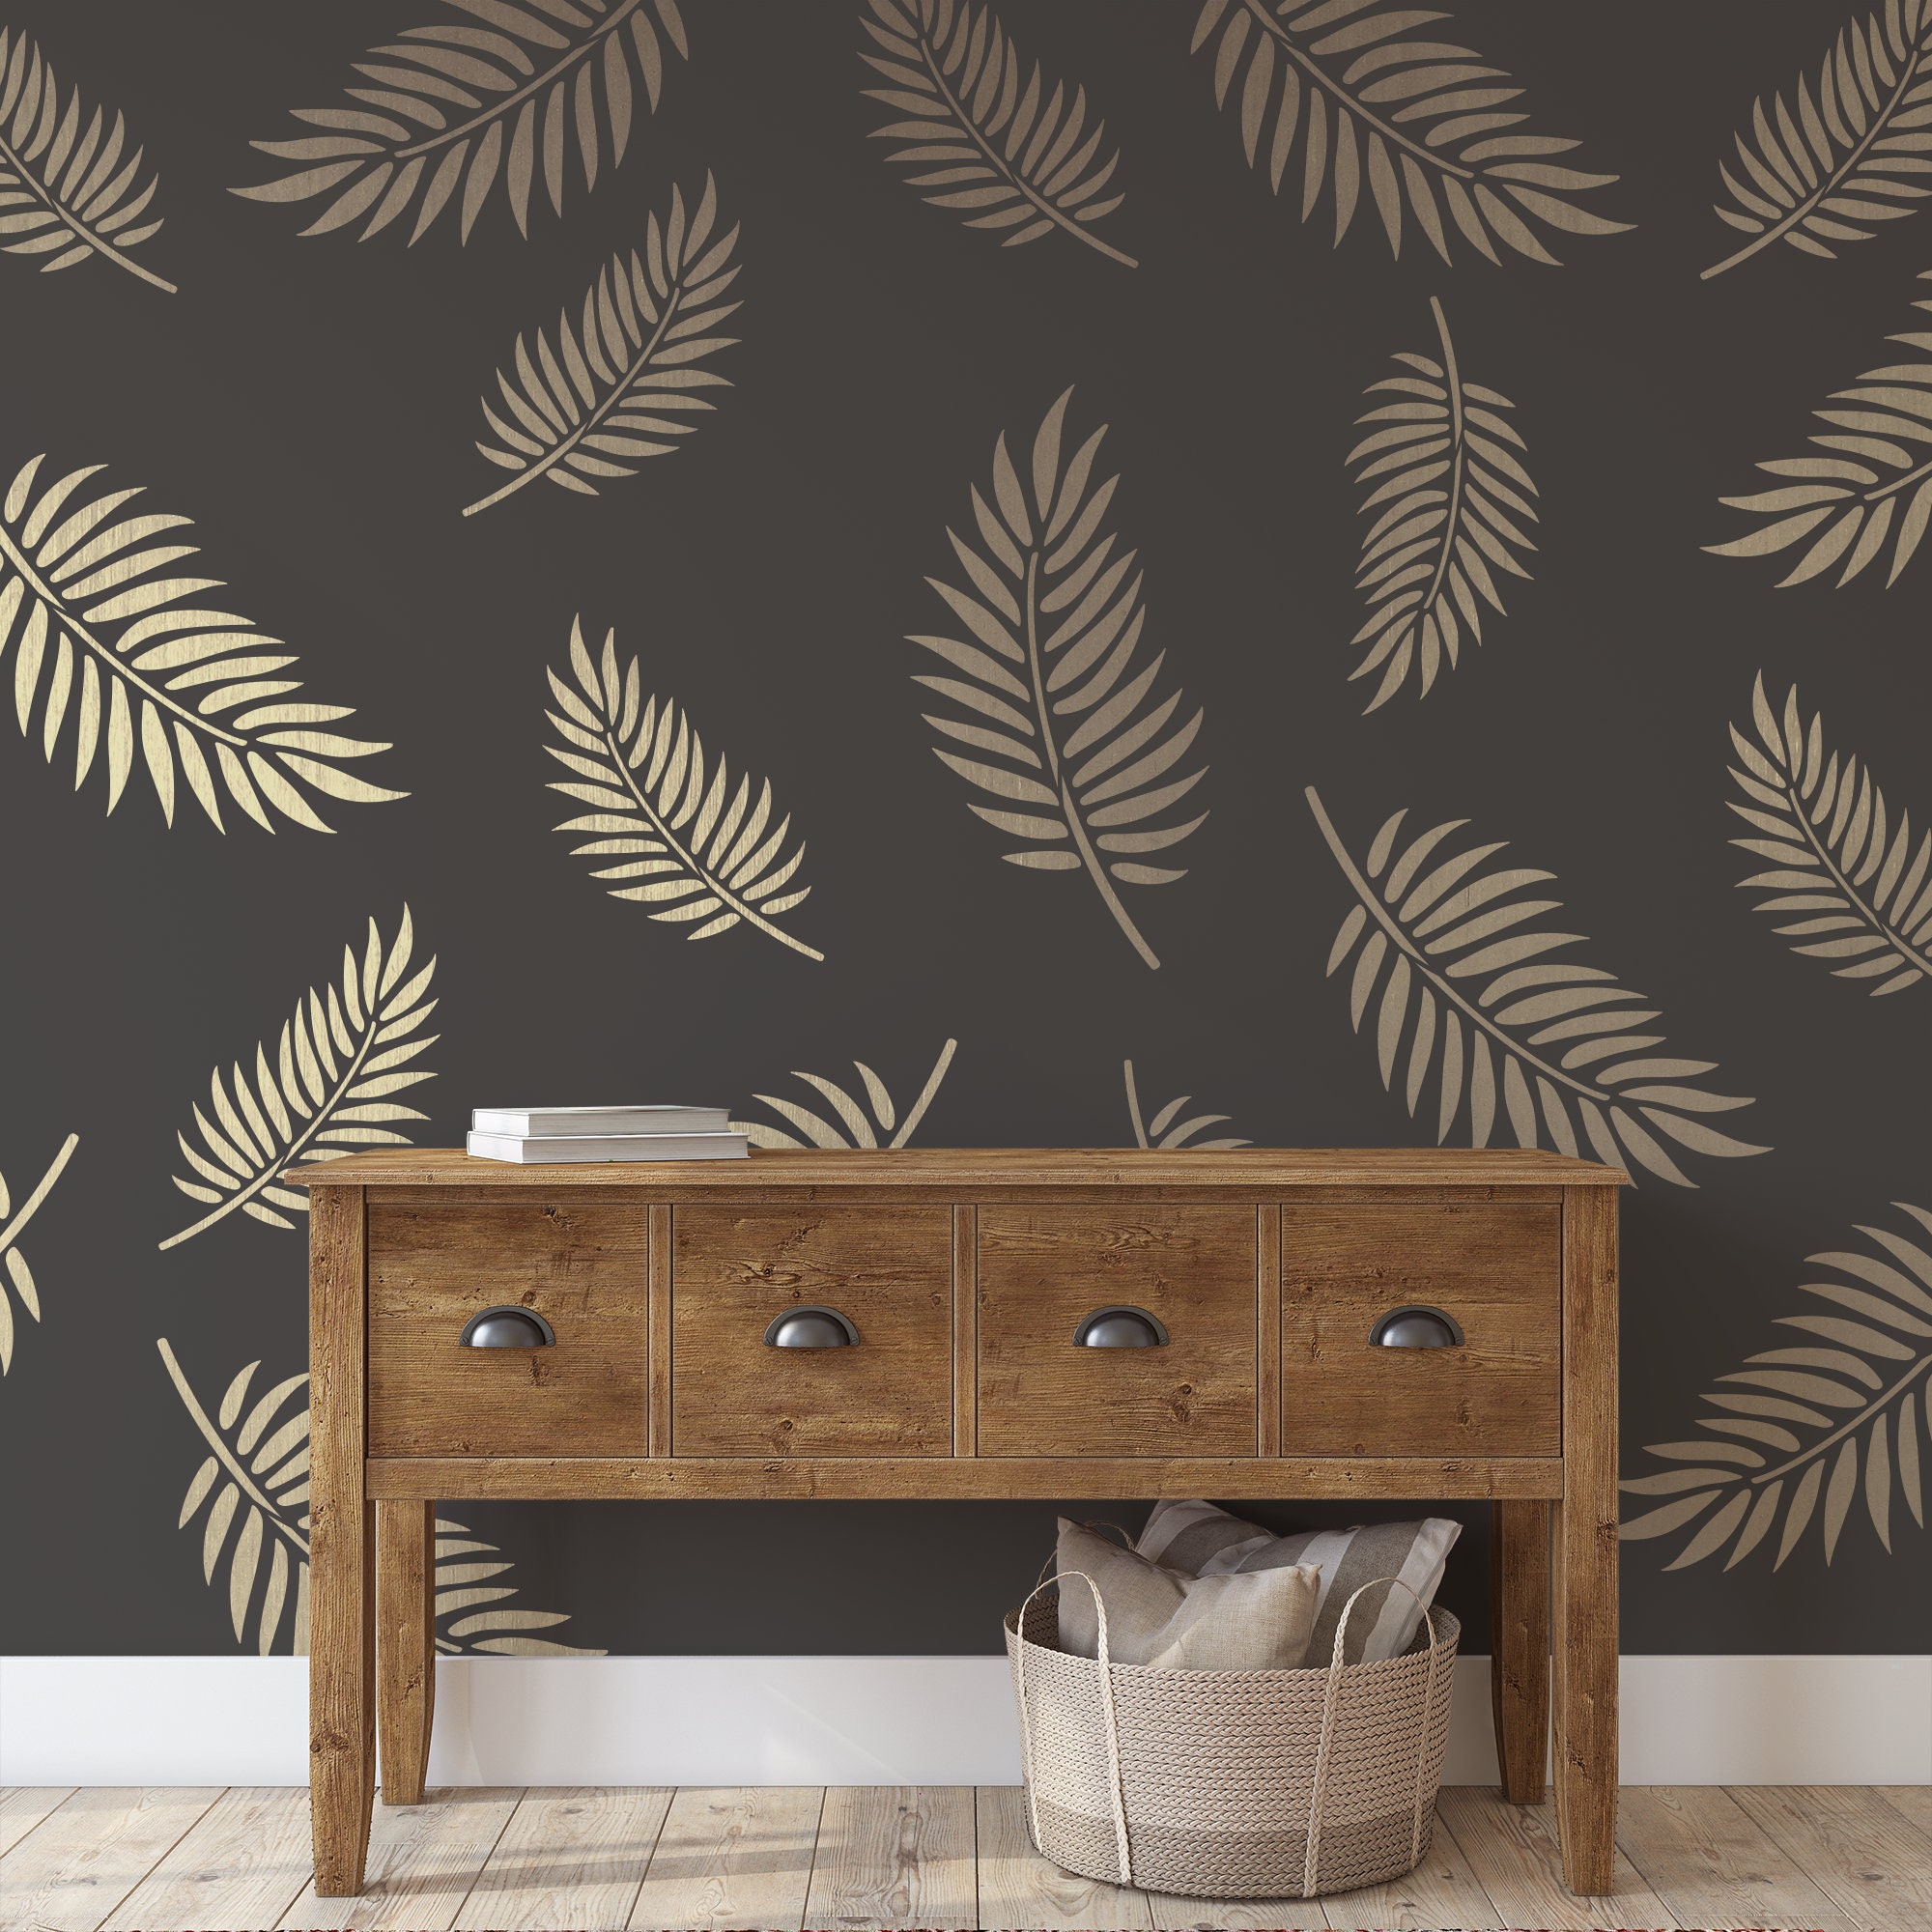 Palm Leaves Pattern Wall Stencil Create a Stunning Wall | Etsy